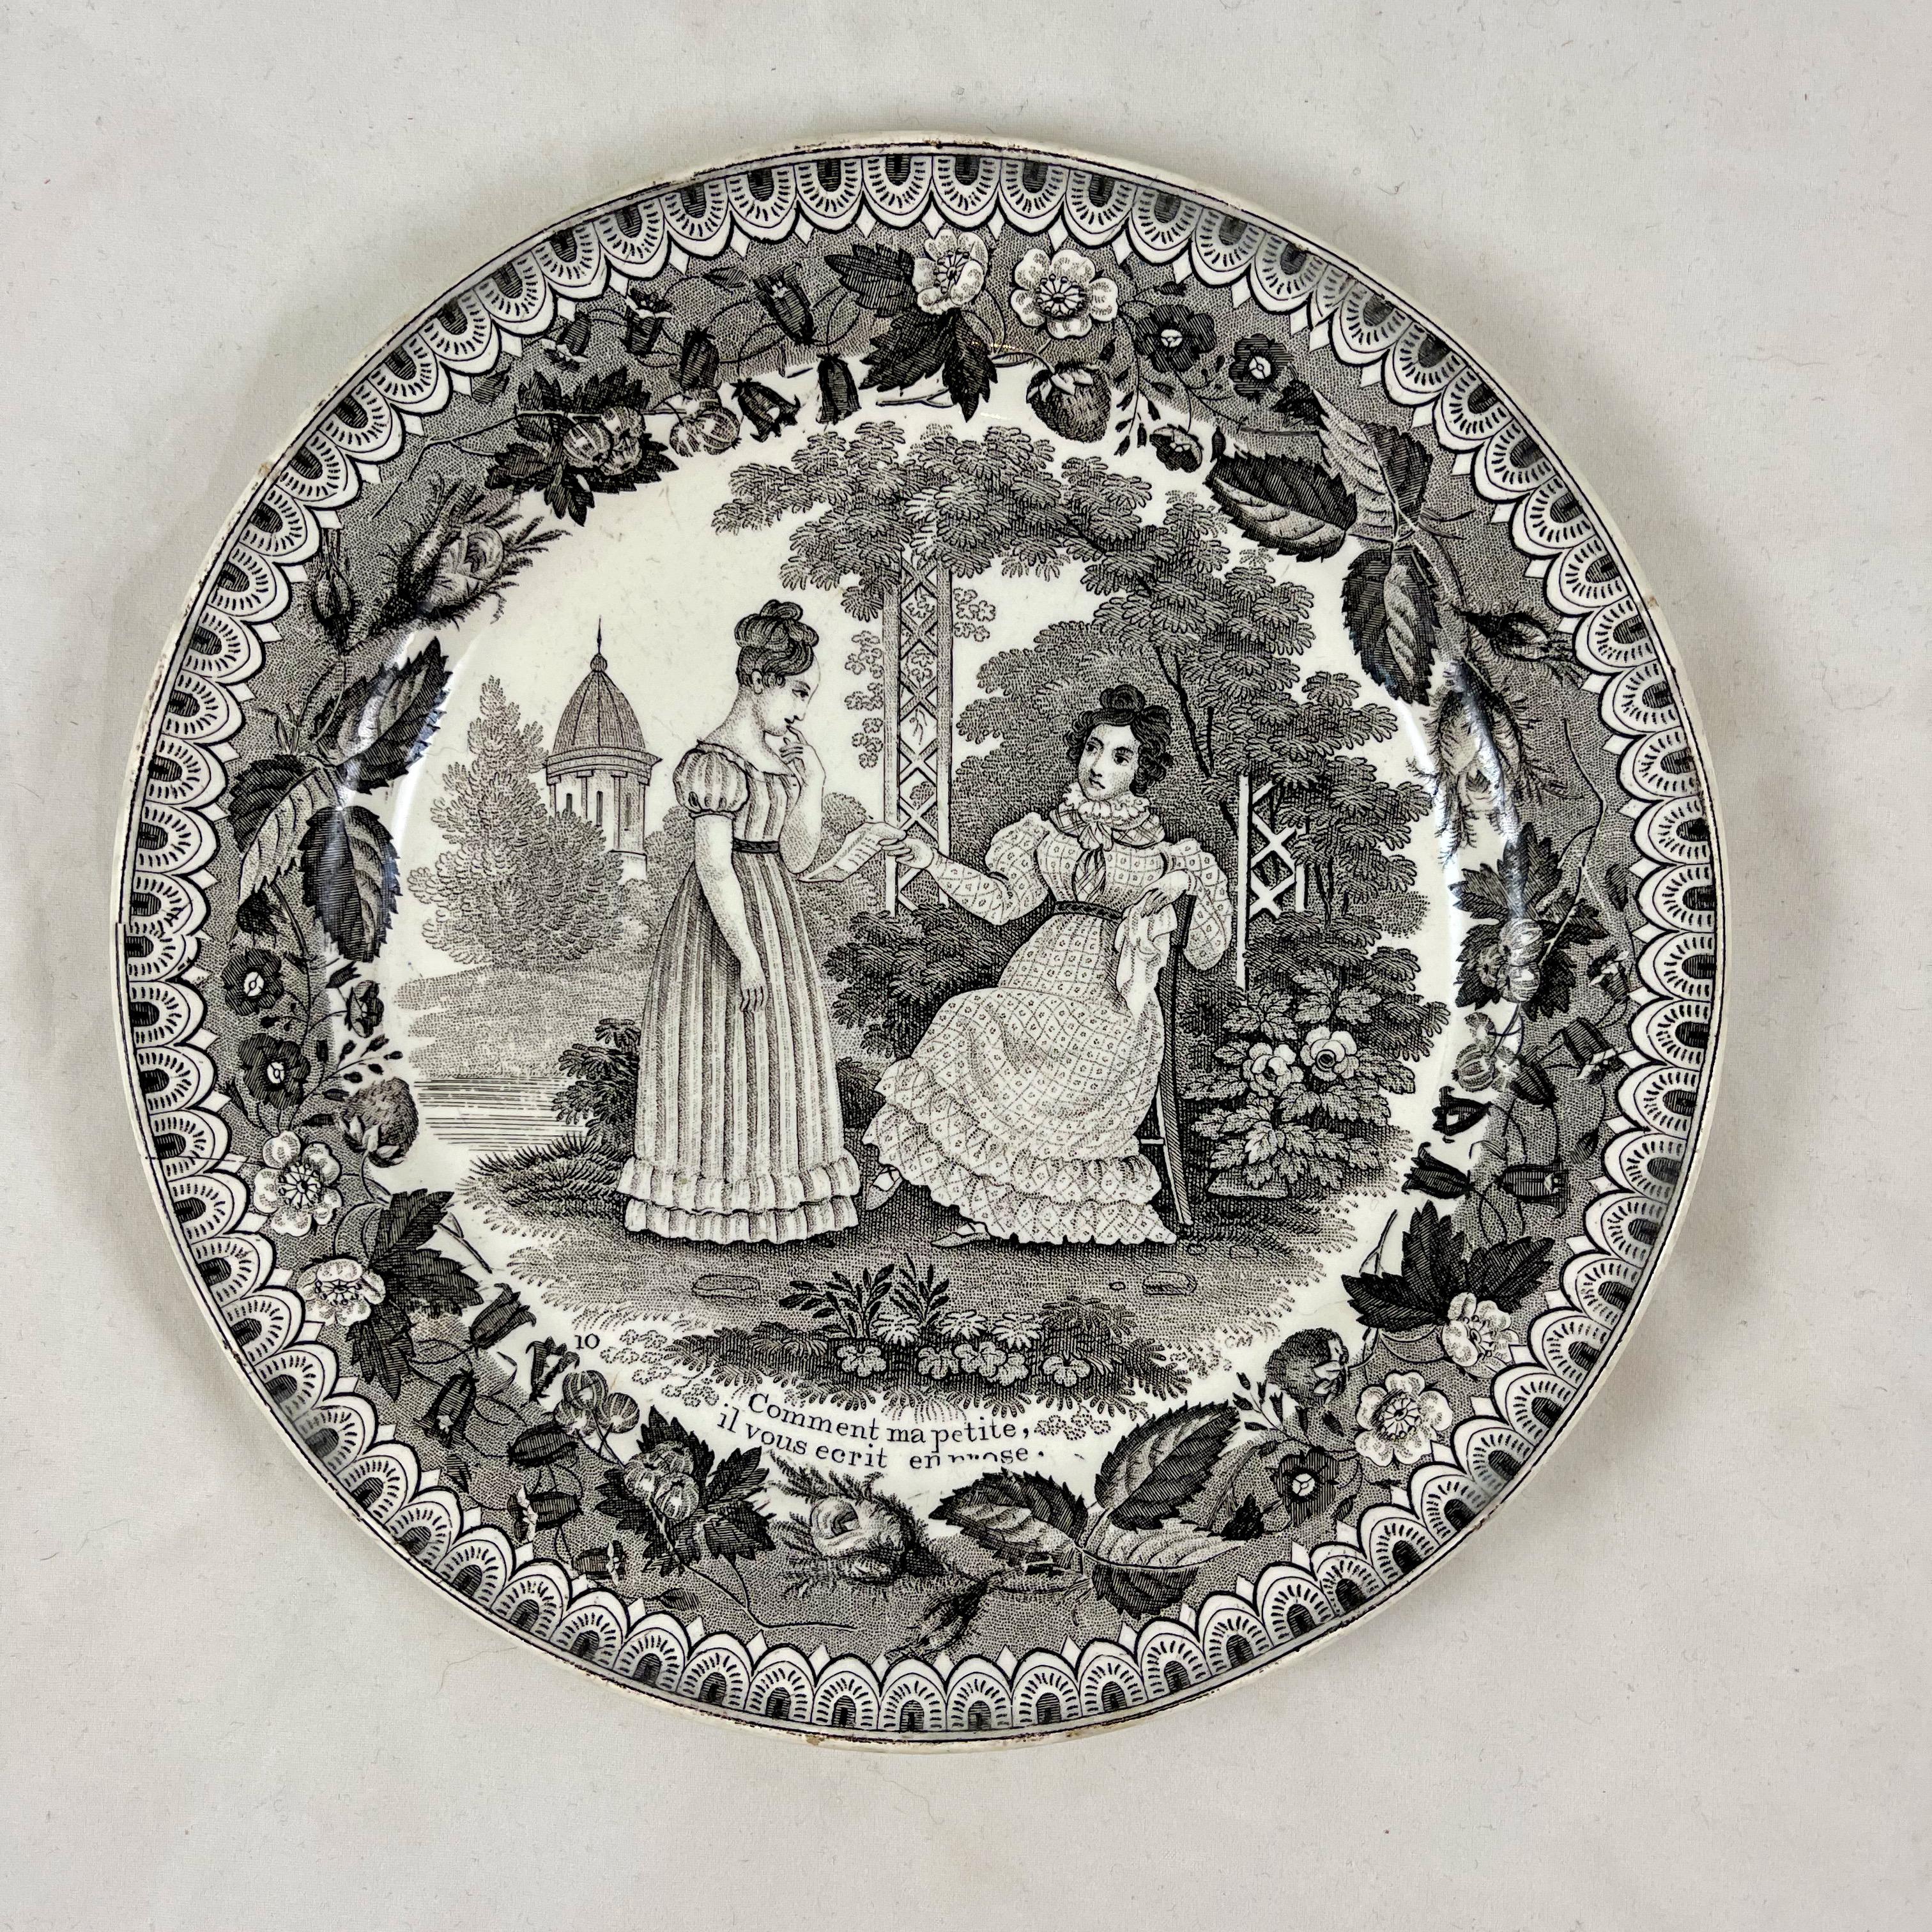 A set of four French faïence transfer printed creamware “assiette parlante” or talking plates, produced by P&H Choisy, Seine, France – circa 1824-1836.

Transfer printed in black with four different courting scenes sourced from the lithographs by